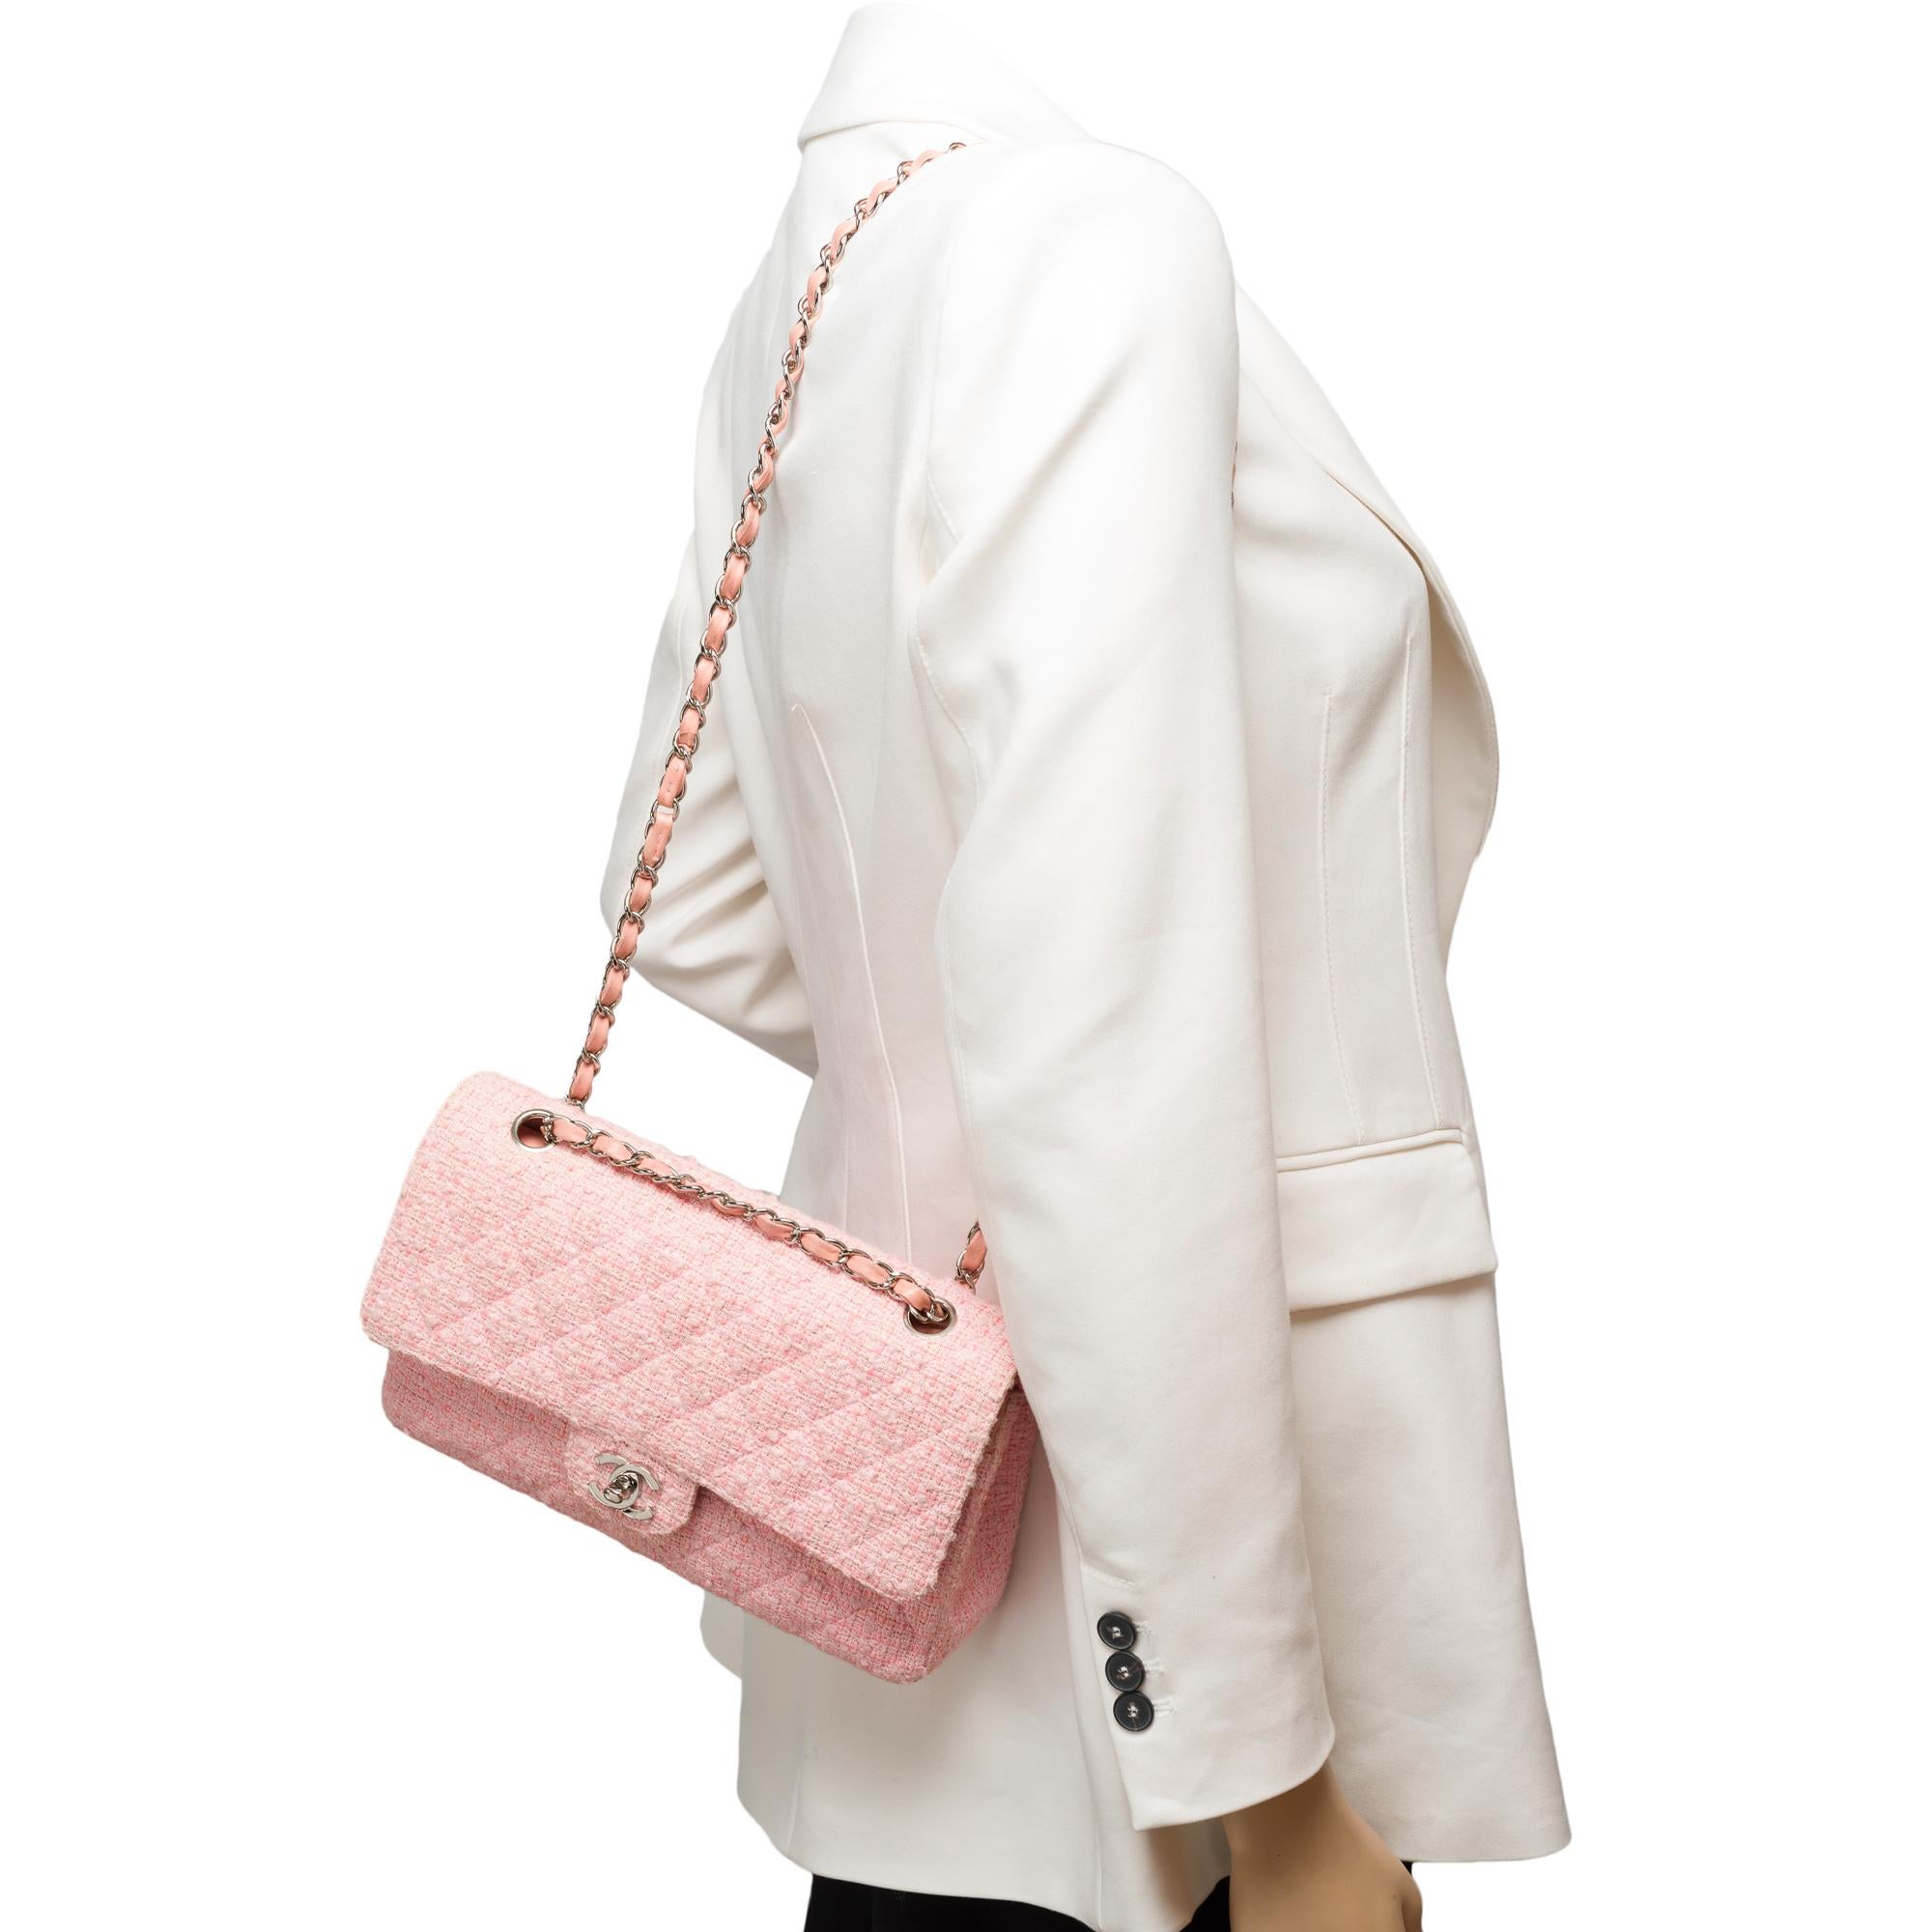 Amazing Chanel Timeless double flap shoulder bag in Pink Quilted Tweed, SHW 9